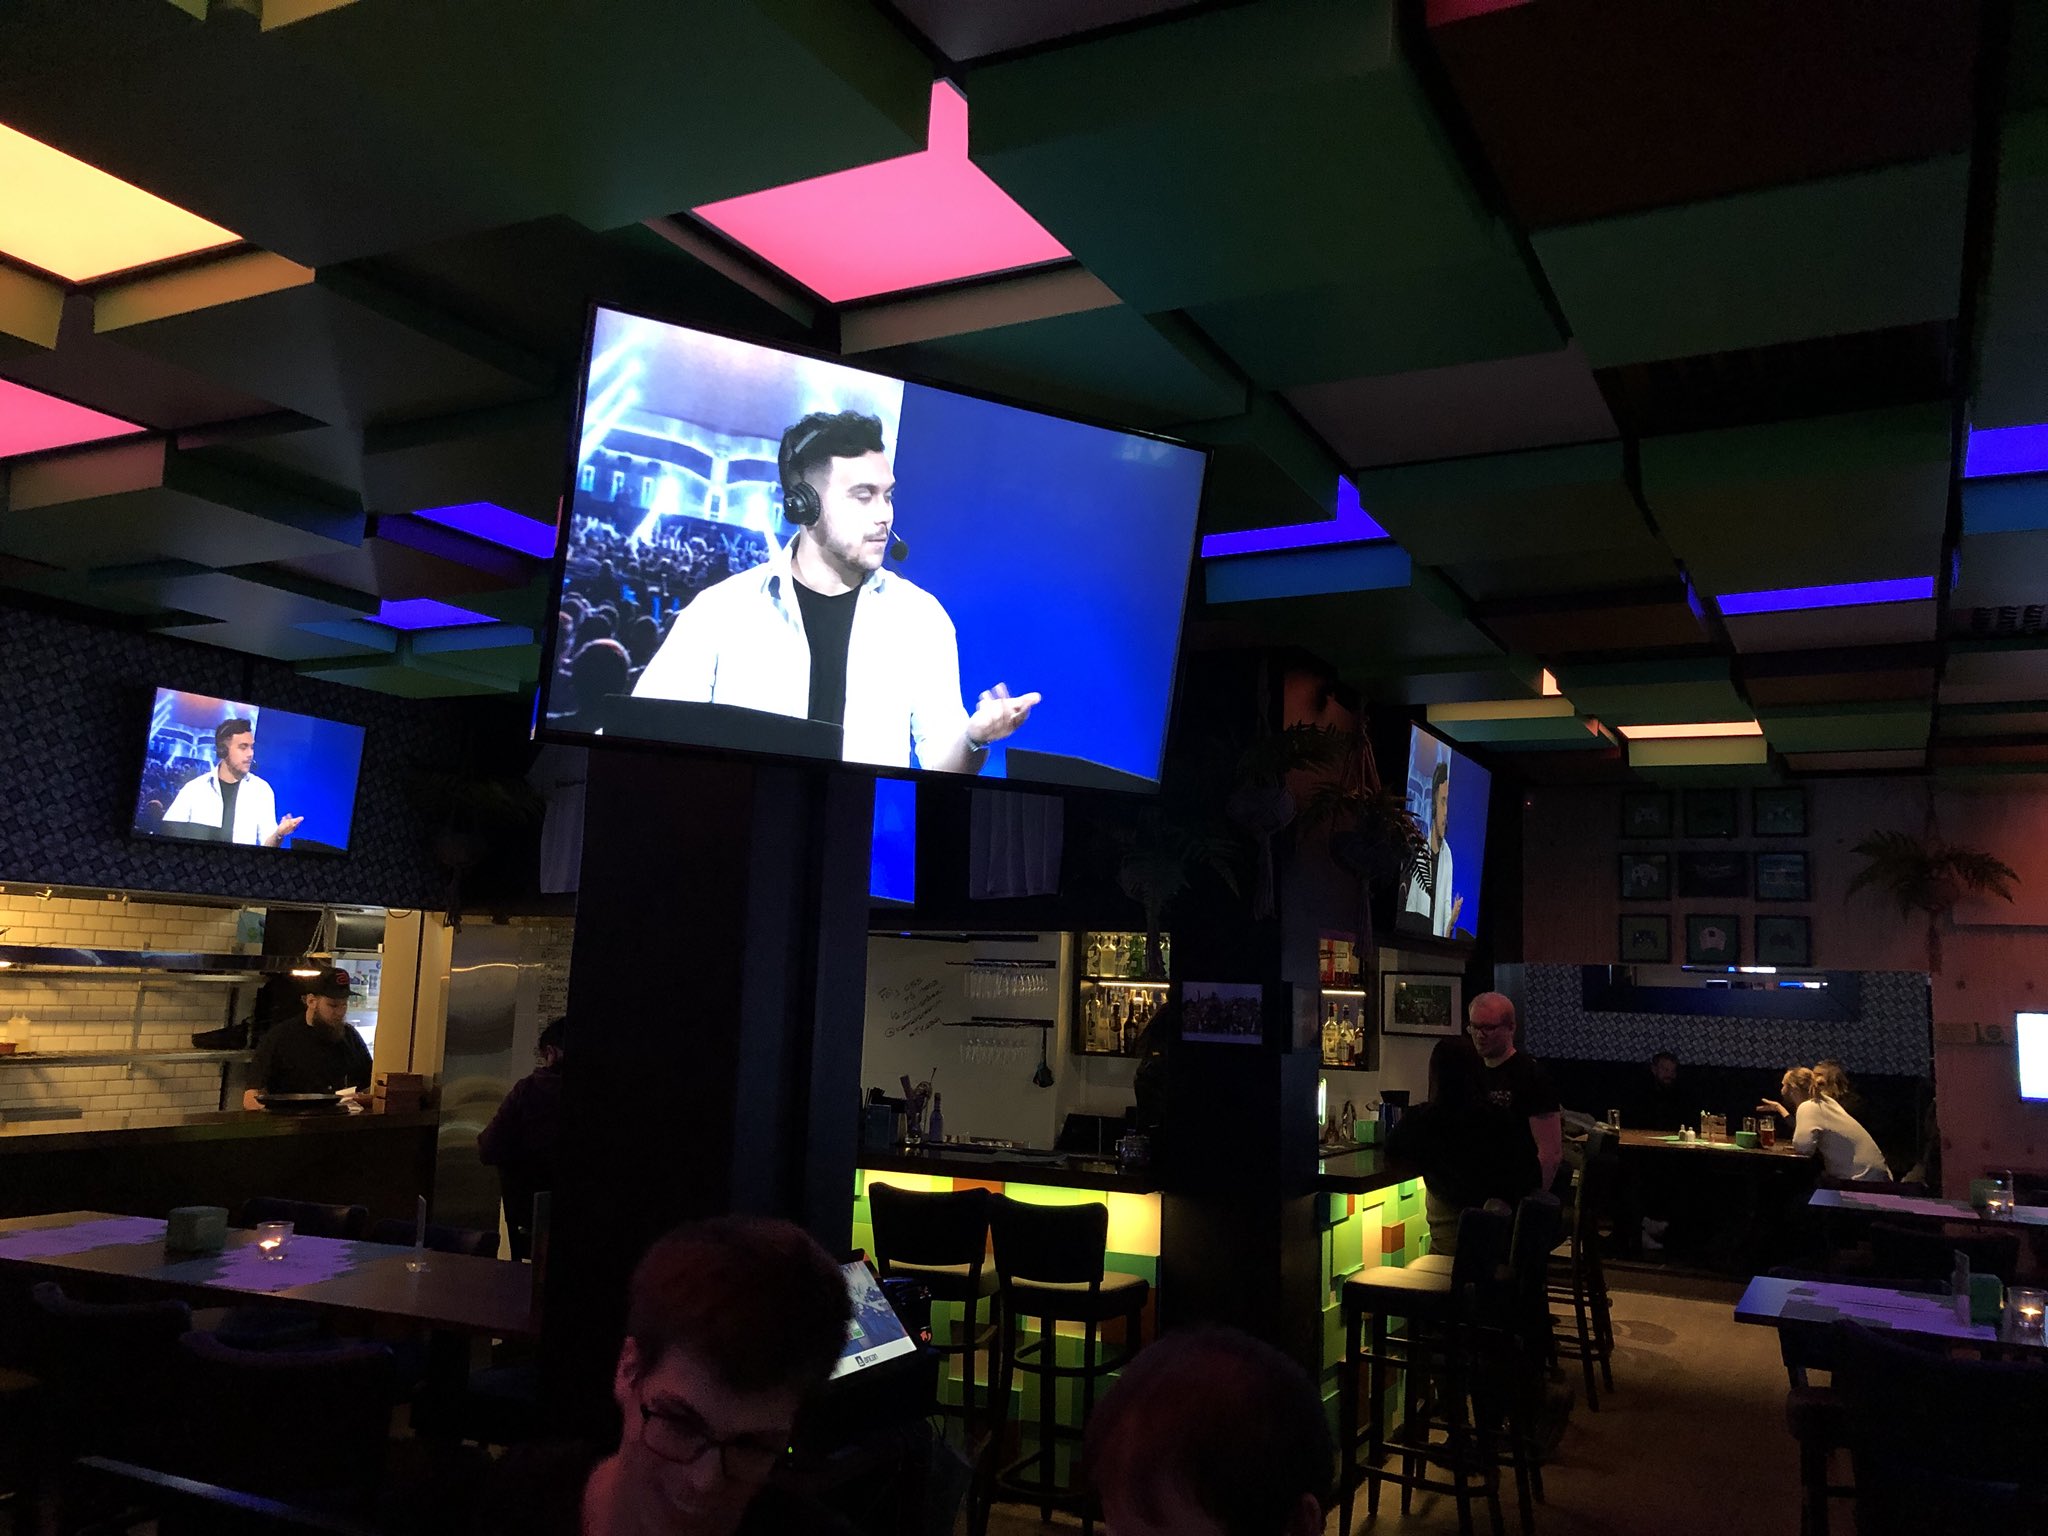 Alex Jebailey on Twitter: "Kappa Bar in Stockholm review: Burger Drinks (super expensive but that's you) Gaming area ⭐️ (really small) Service and (really chill place